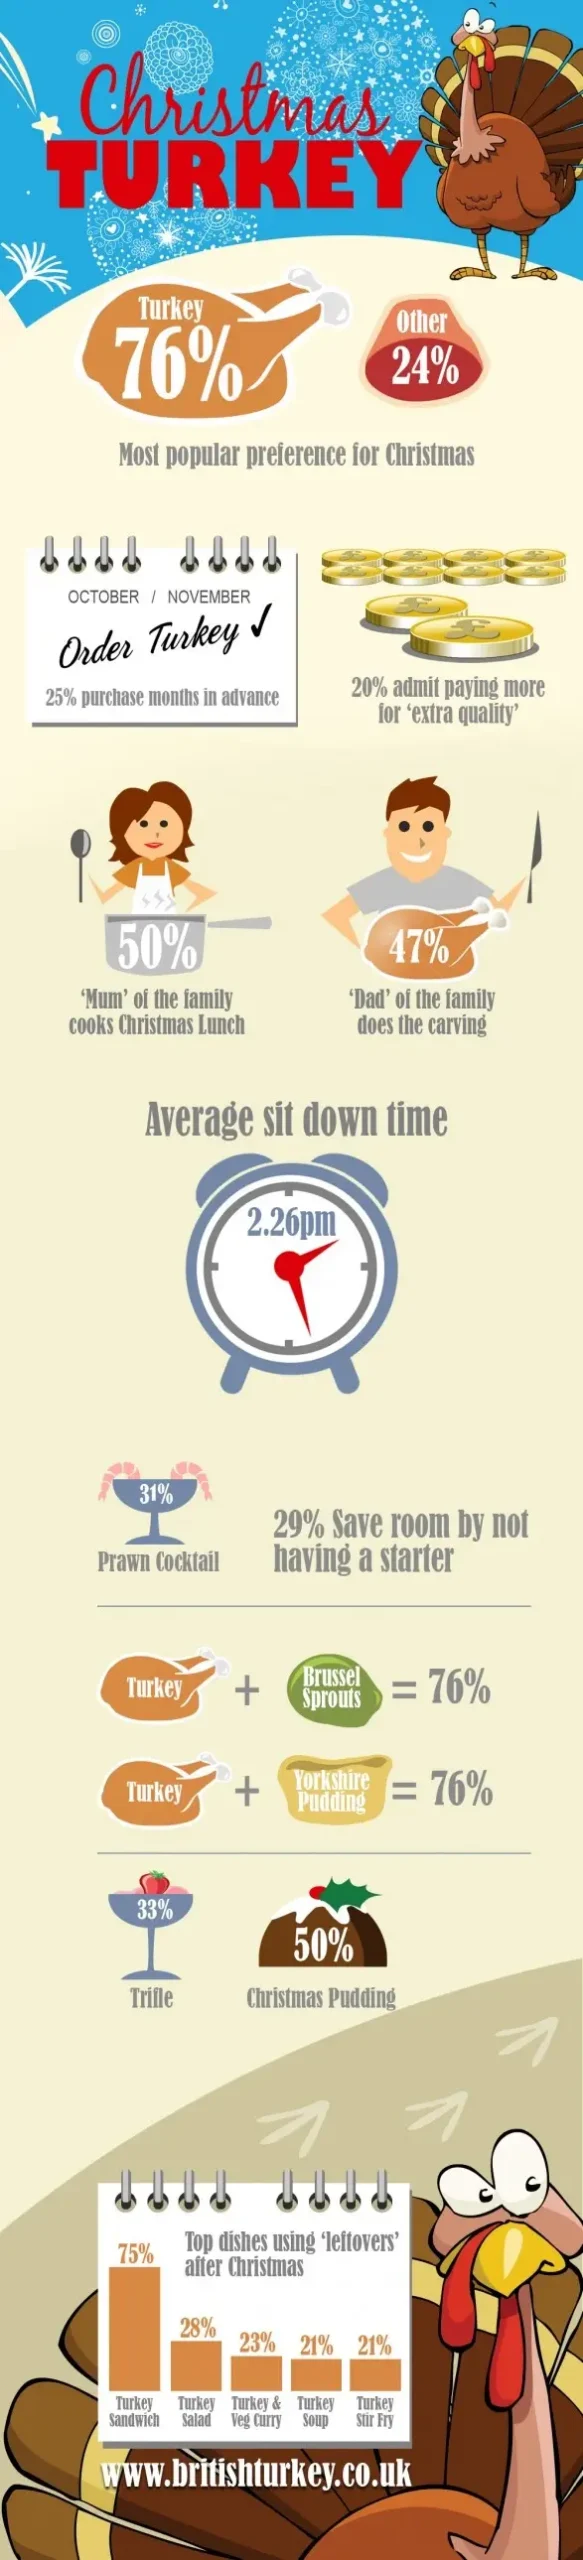 Christmas Turkey Facts & Stats
